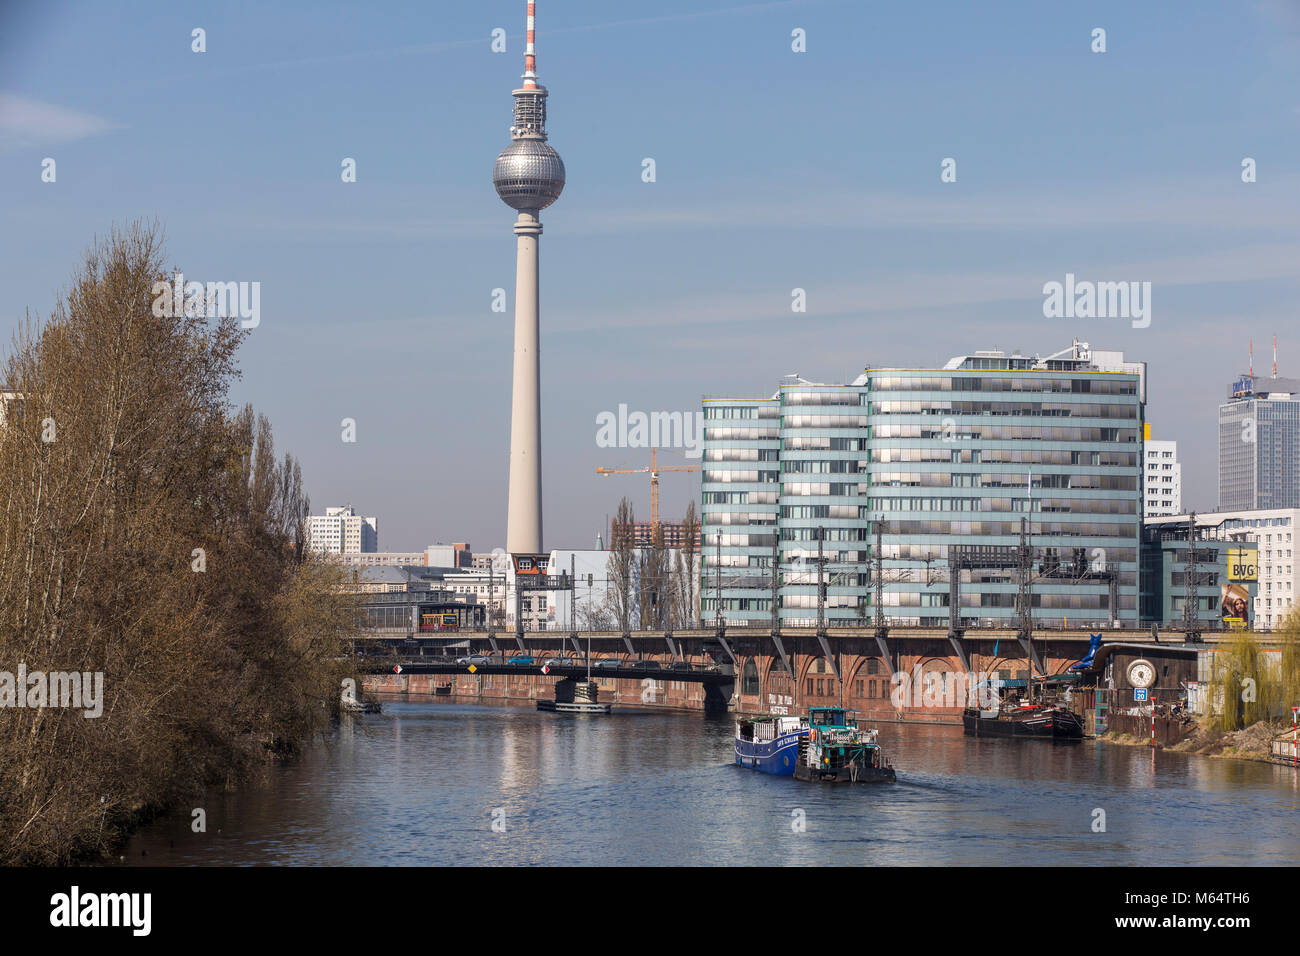 The River Spree in Berlin, administration building of the Berliner Verkehrsbetriebe, BVG, TV Tower, Germany Stock Photo